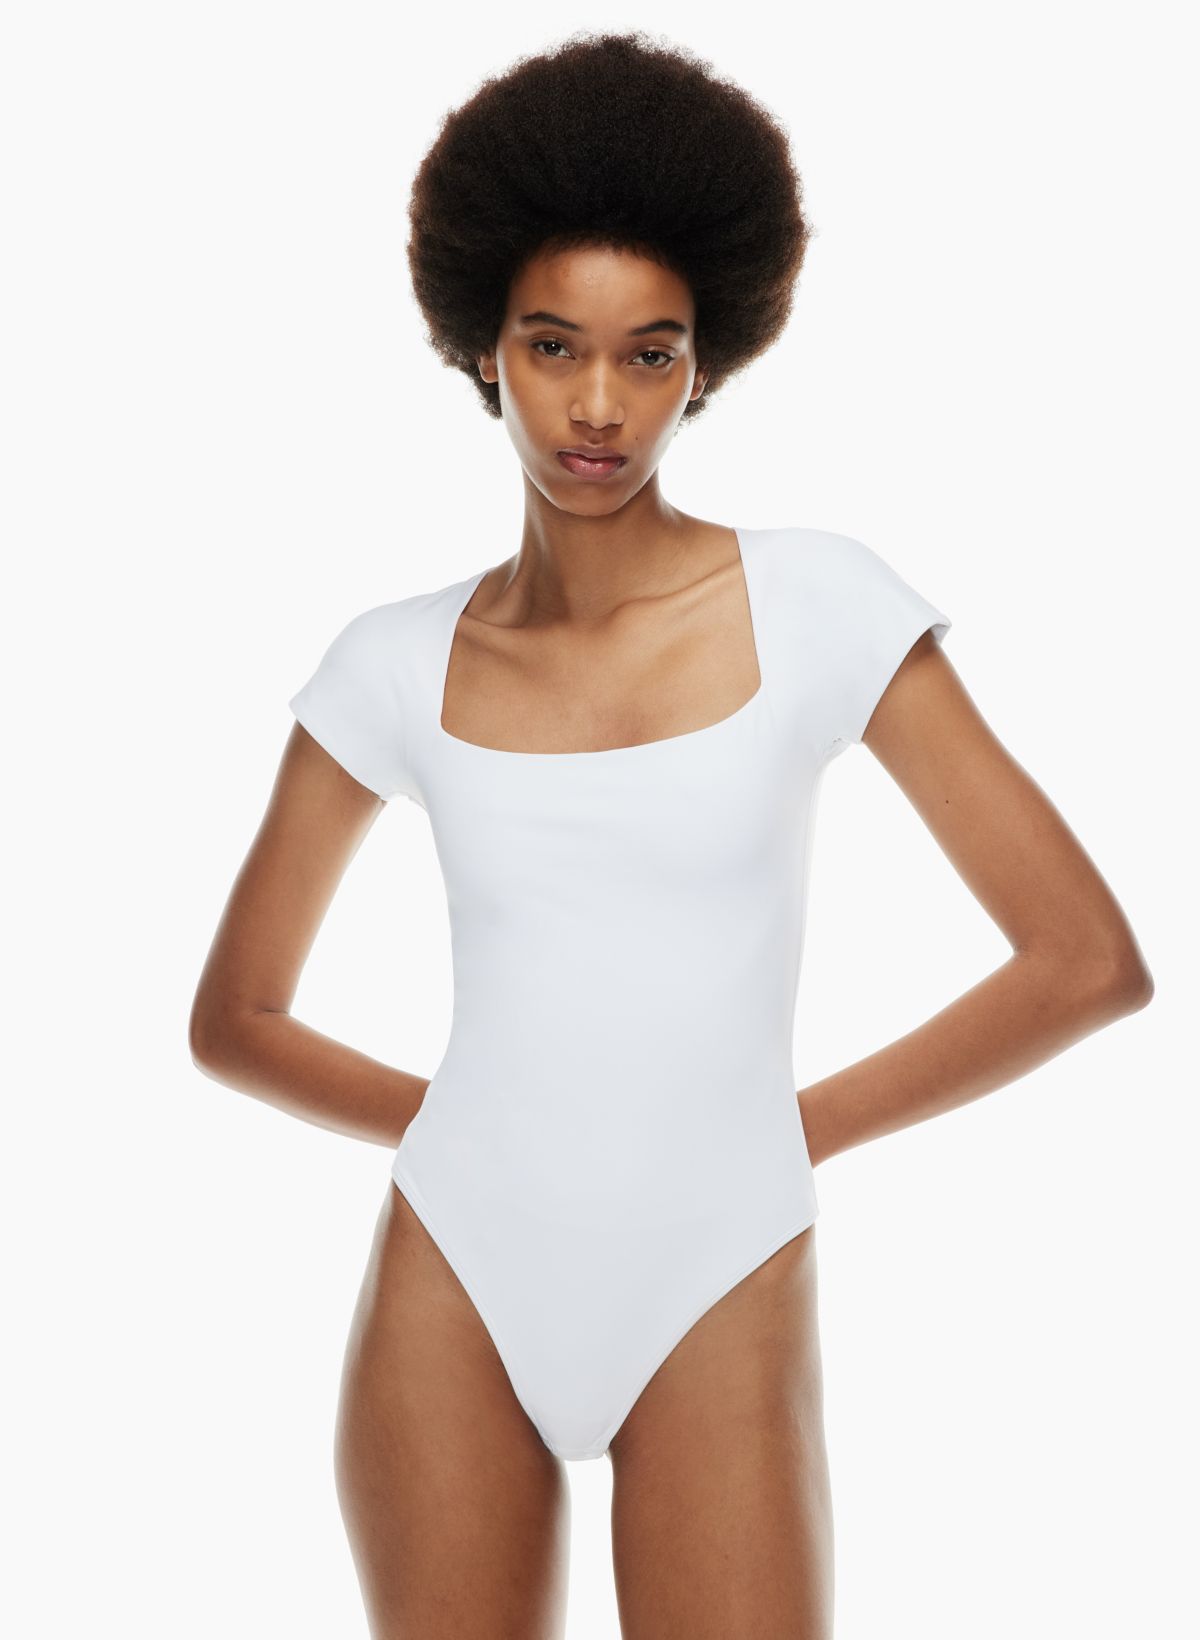 Express Nude One Strap Body Contour bodysuit SMALL